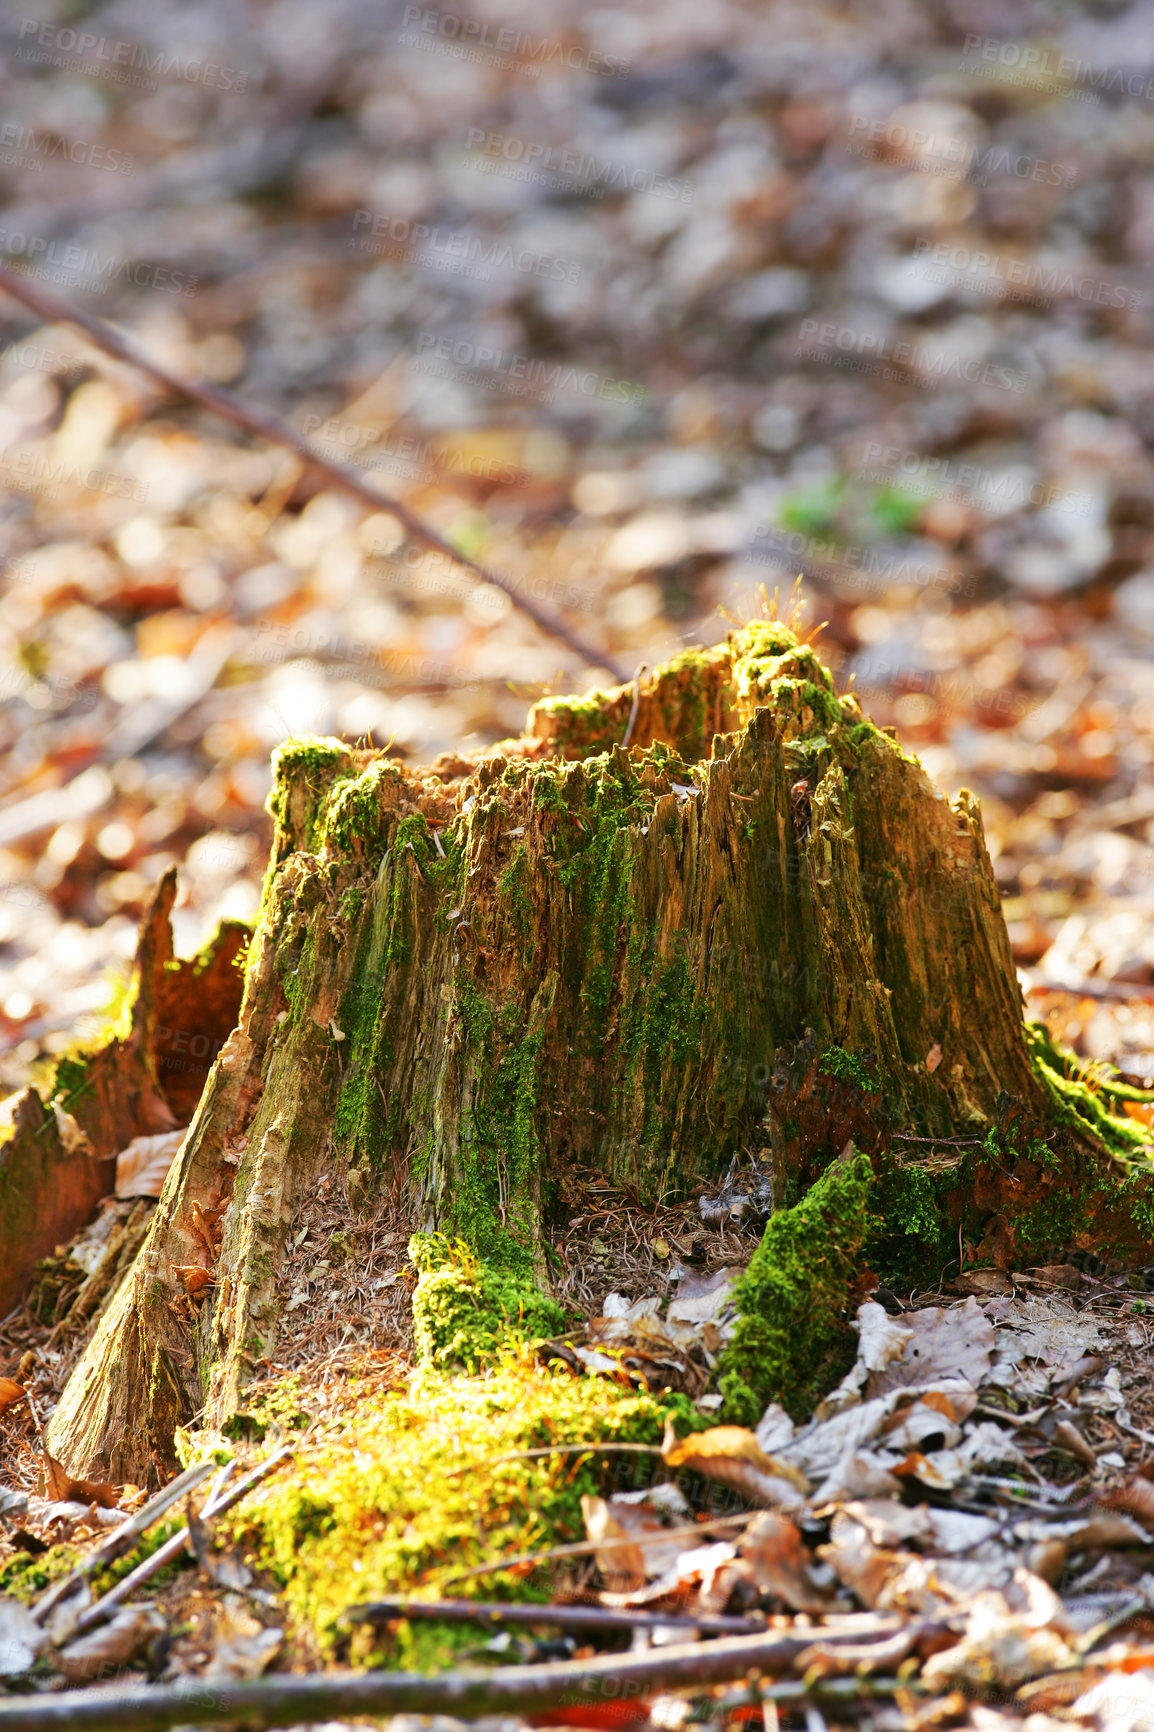 Buy stock photo Closeup of an old, mossy tree stump in the forest showing a biological lifecycle. Chopped down tree signifying deforestation and tree felling. Macro details of wood and bark in the wilderness